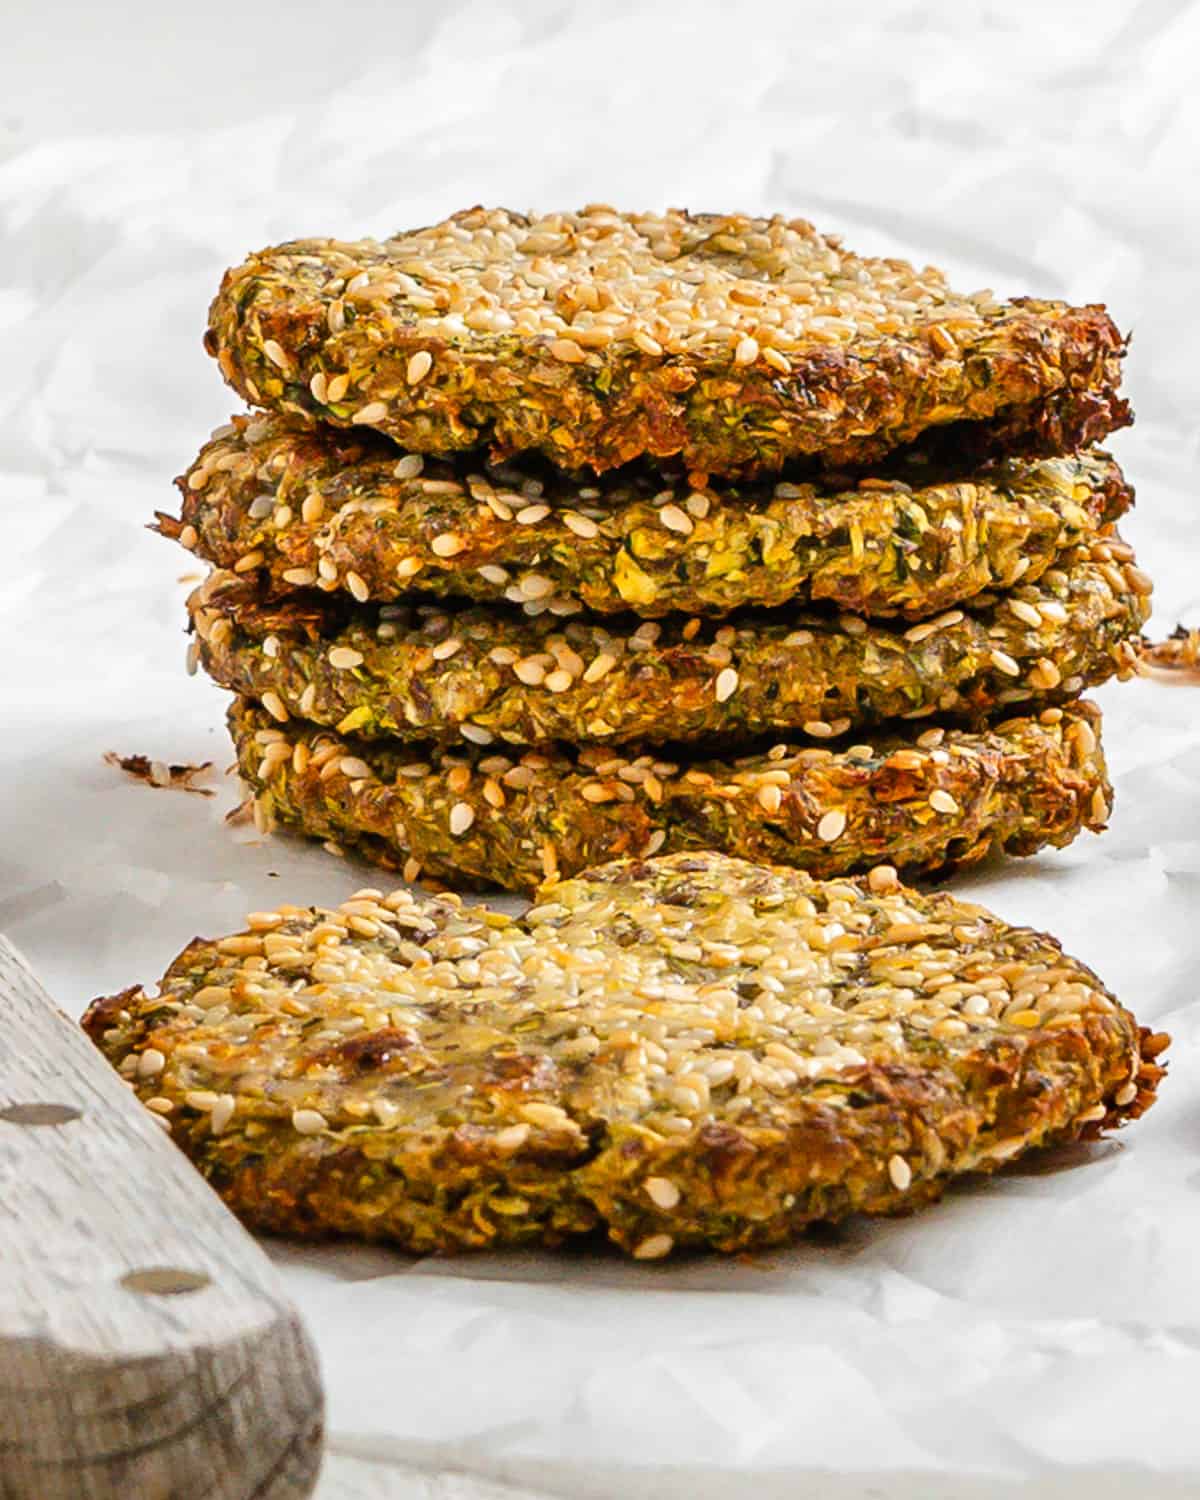 completed stack of Vegan Baked Zucchini Fritters against a white surface